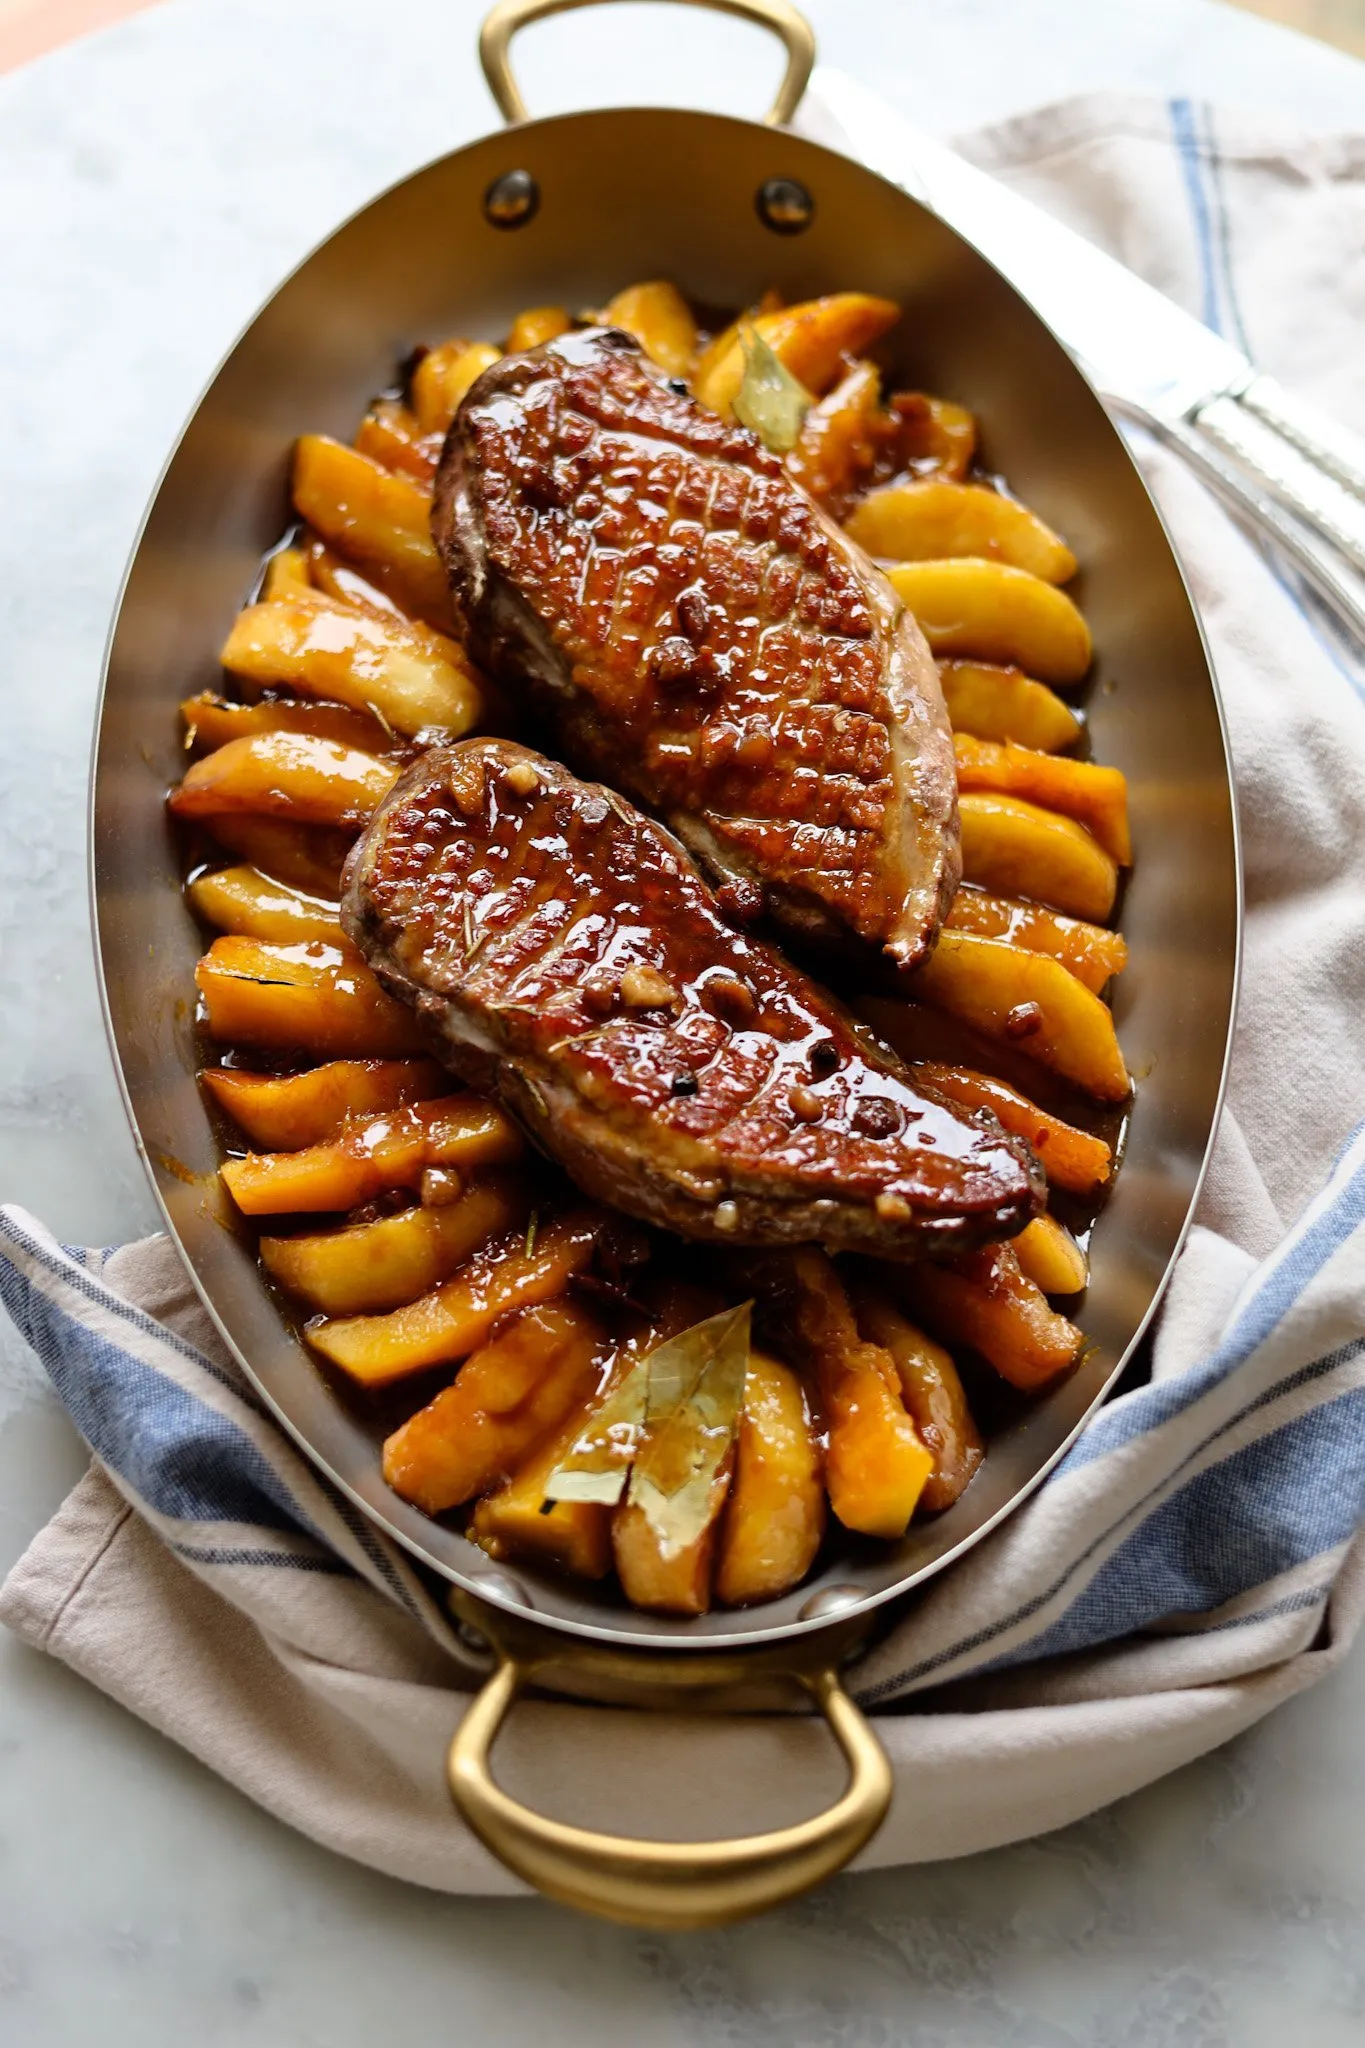 duck magret with apples and squash